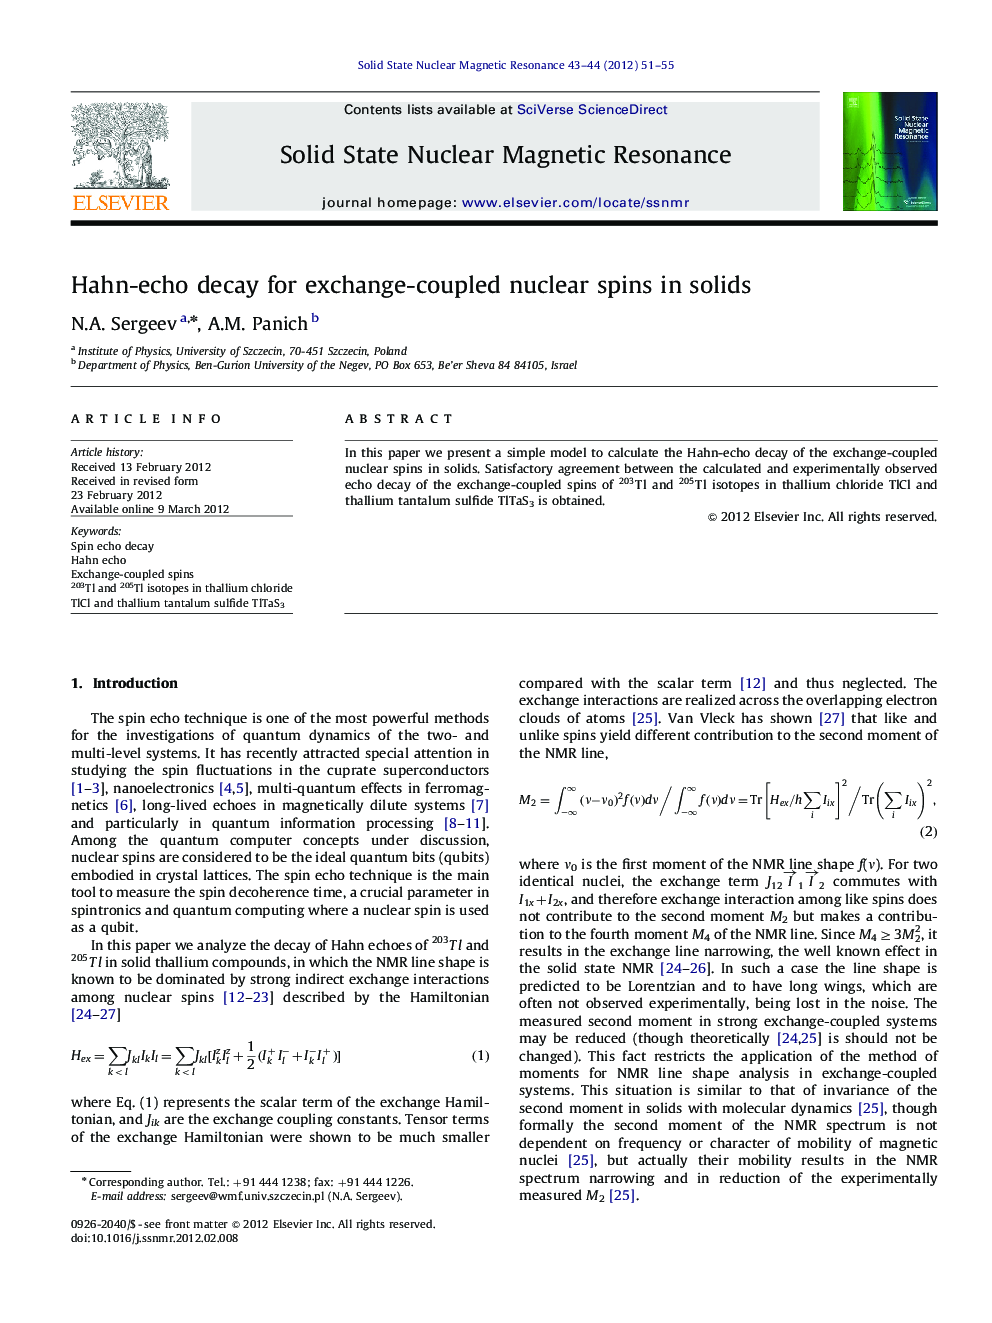 Hahn-echo decay for exchange-coupled nuclear spins in solids